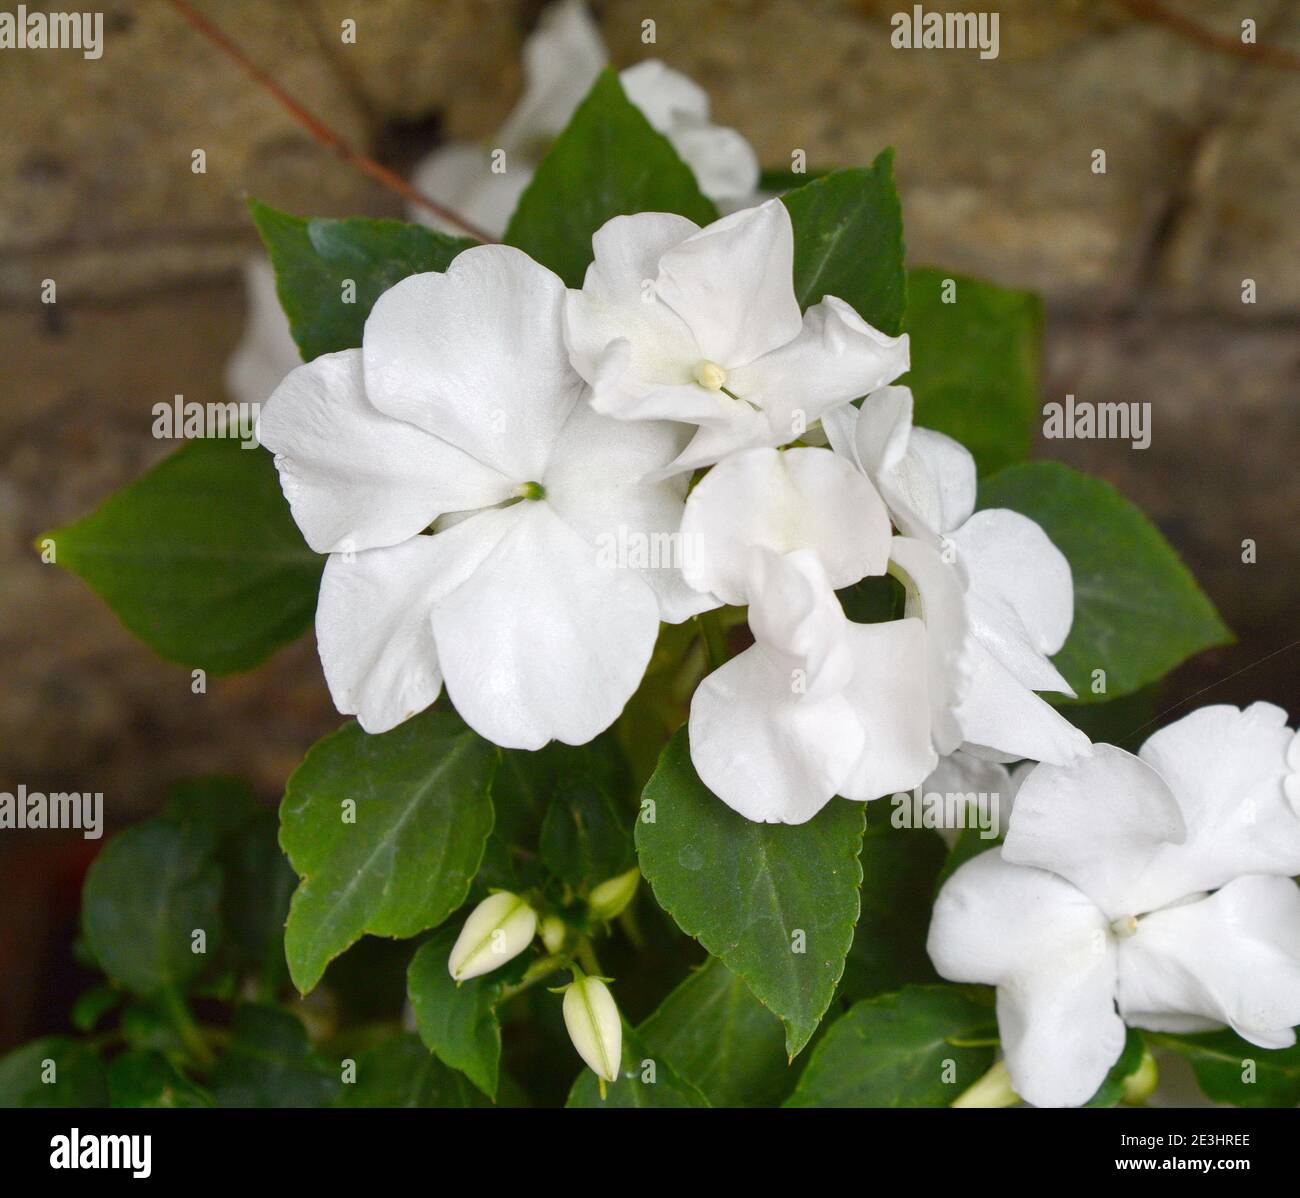 white impatiens close up, scientific name Impatiens walleriana flowers also called Balsam, flowerbed of blossoms in white Stock Photo